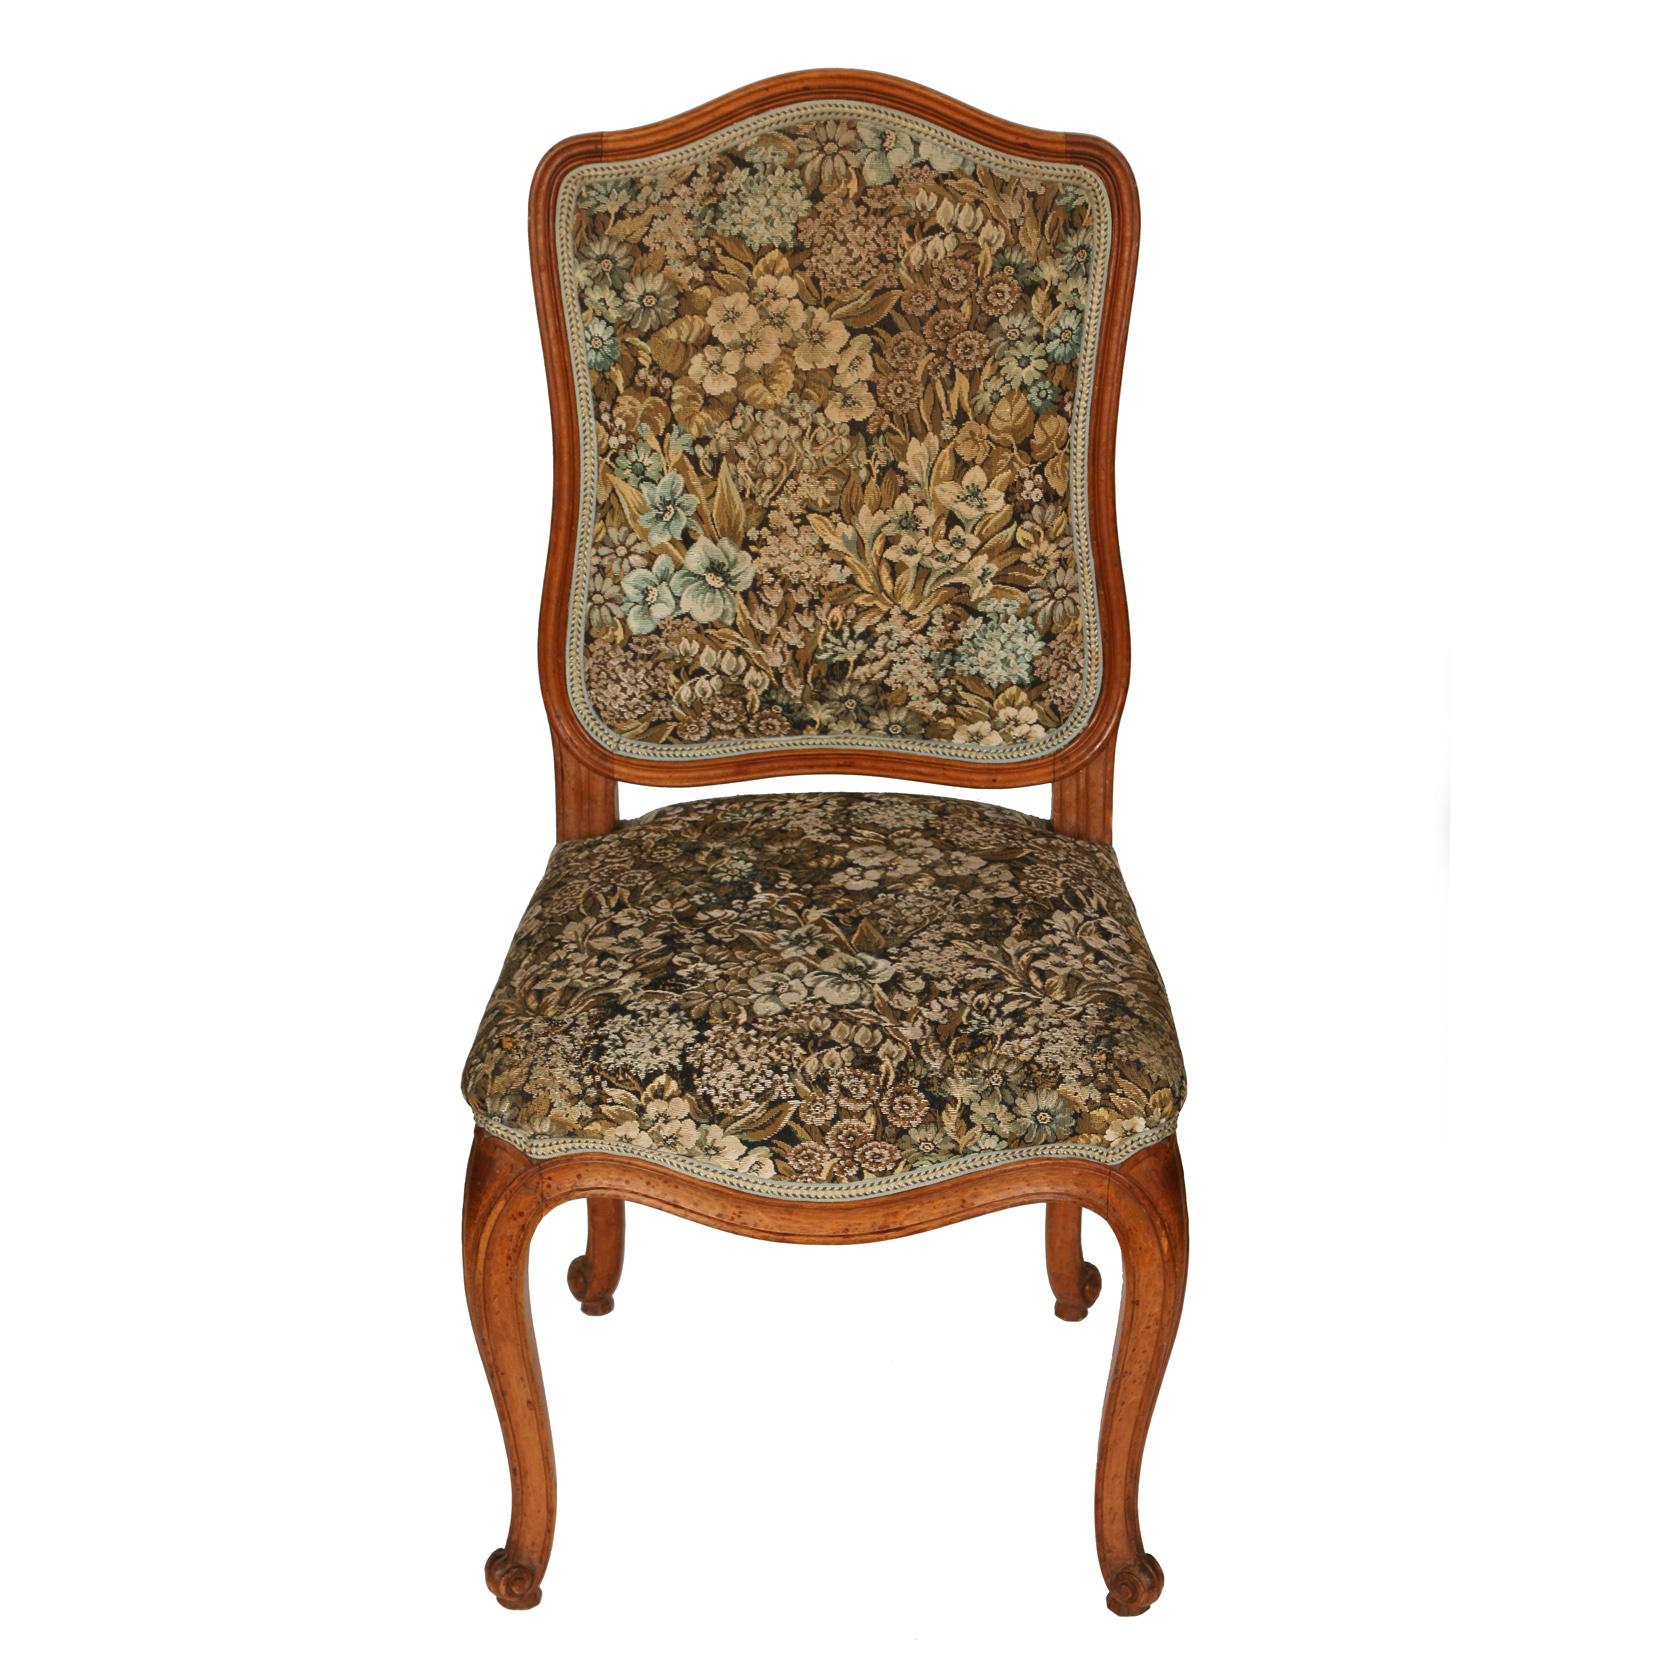 A set of eight French upholstered dining chairs with curved back, seat apron and cabriole leg. Floral fabric in tones of gold, light brown and pale blue on a dark ground.